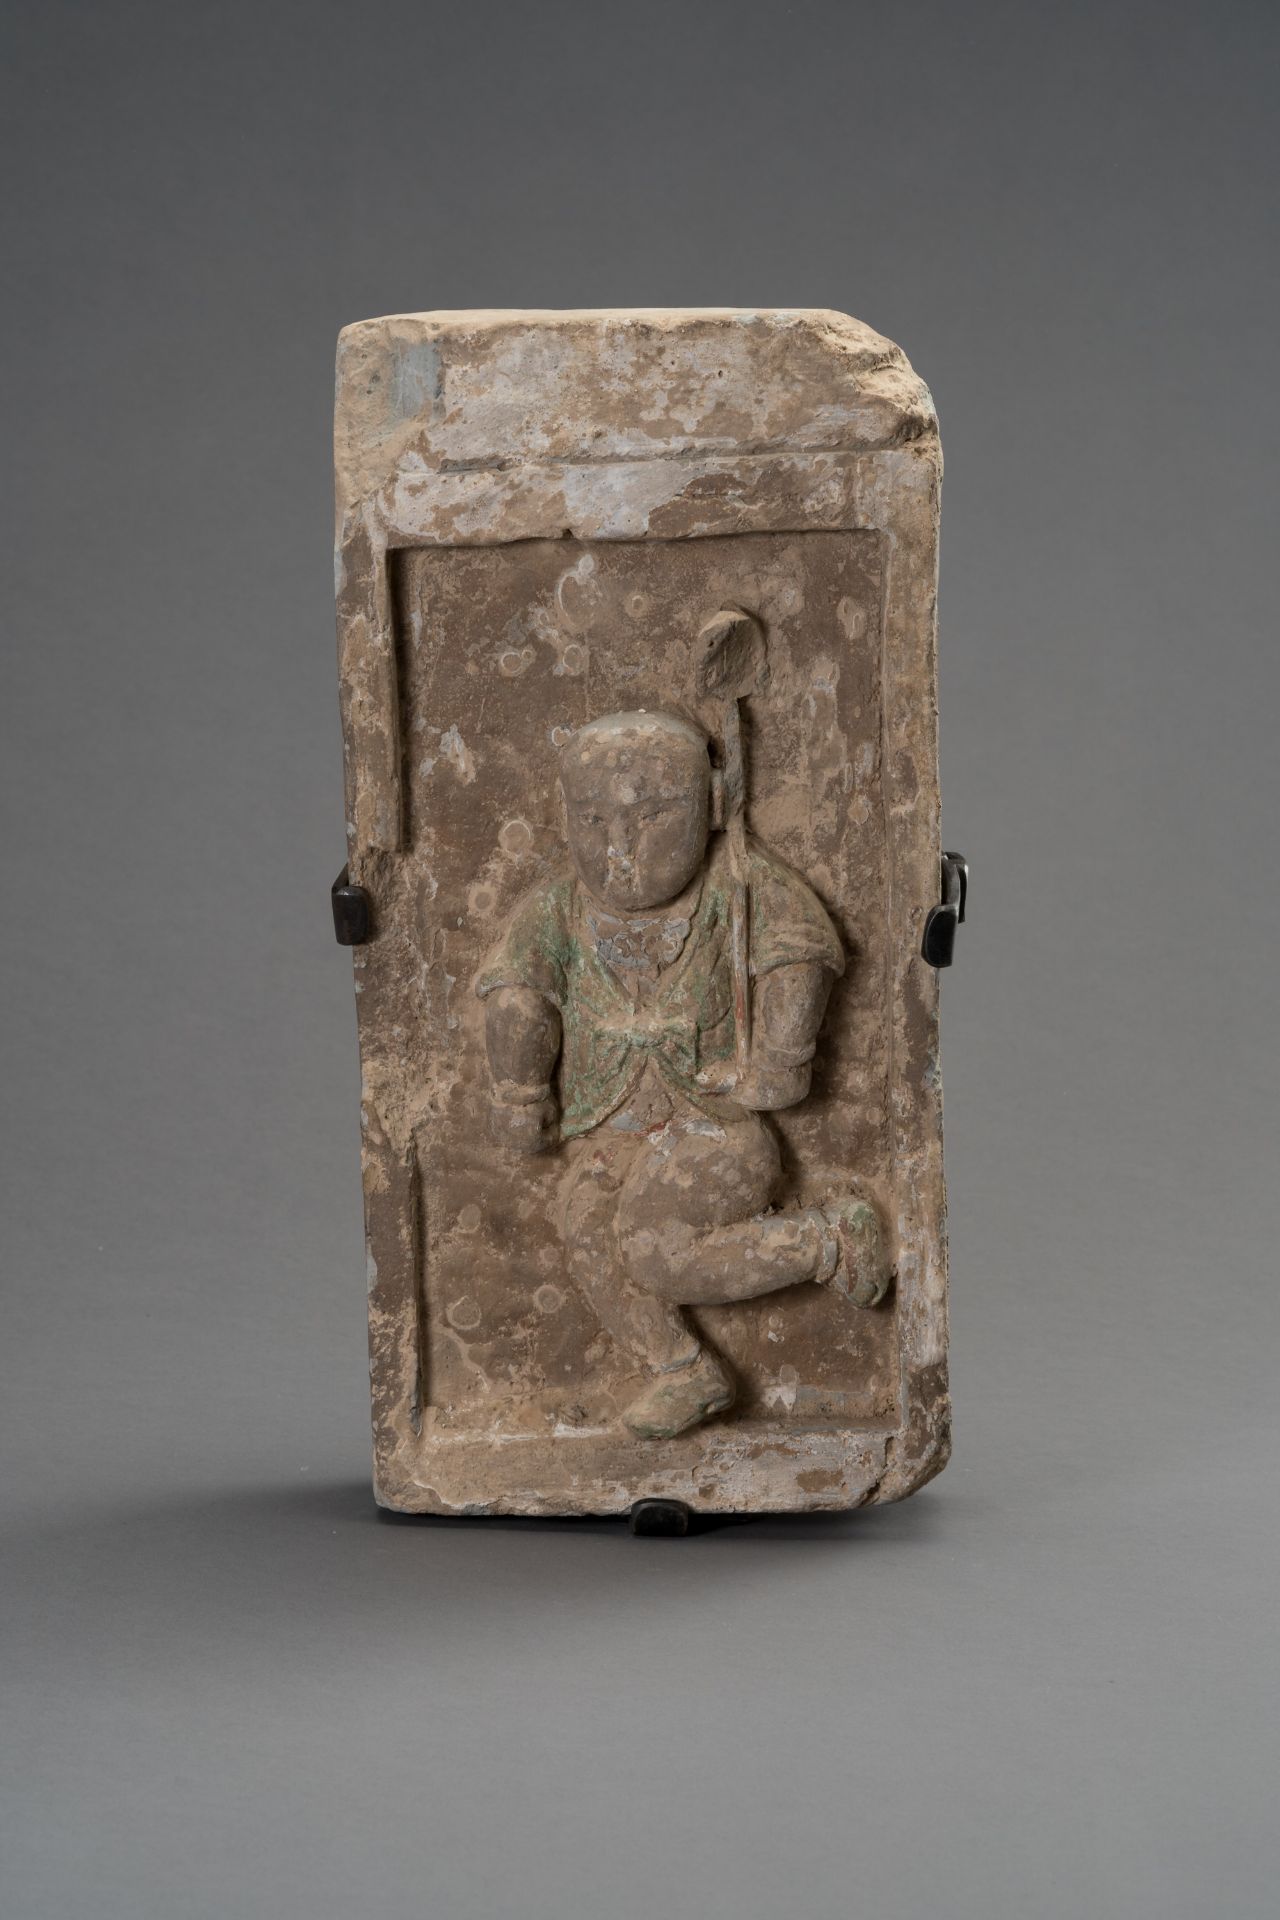 A TERRACOTTA BRICK DEPICTING A CHILD WITH STANDARD, SONG DYNASTY